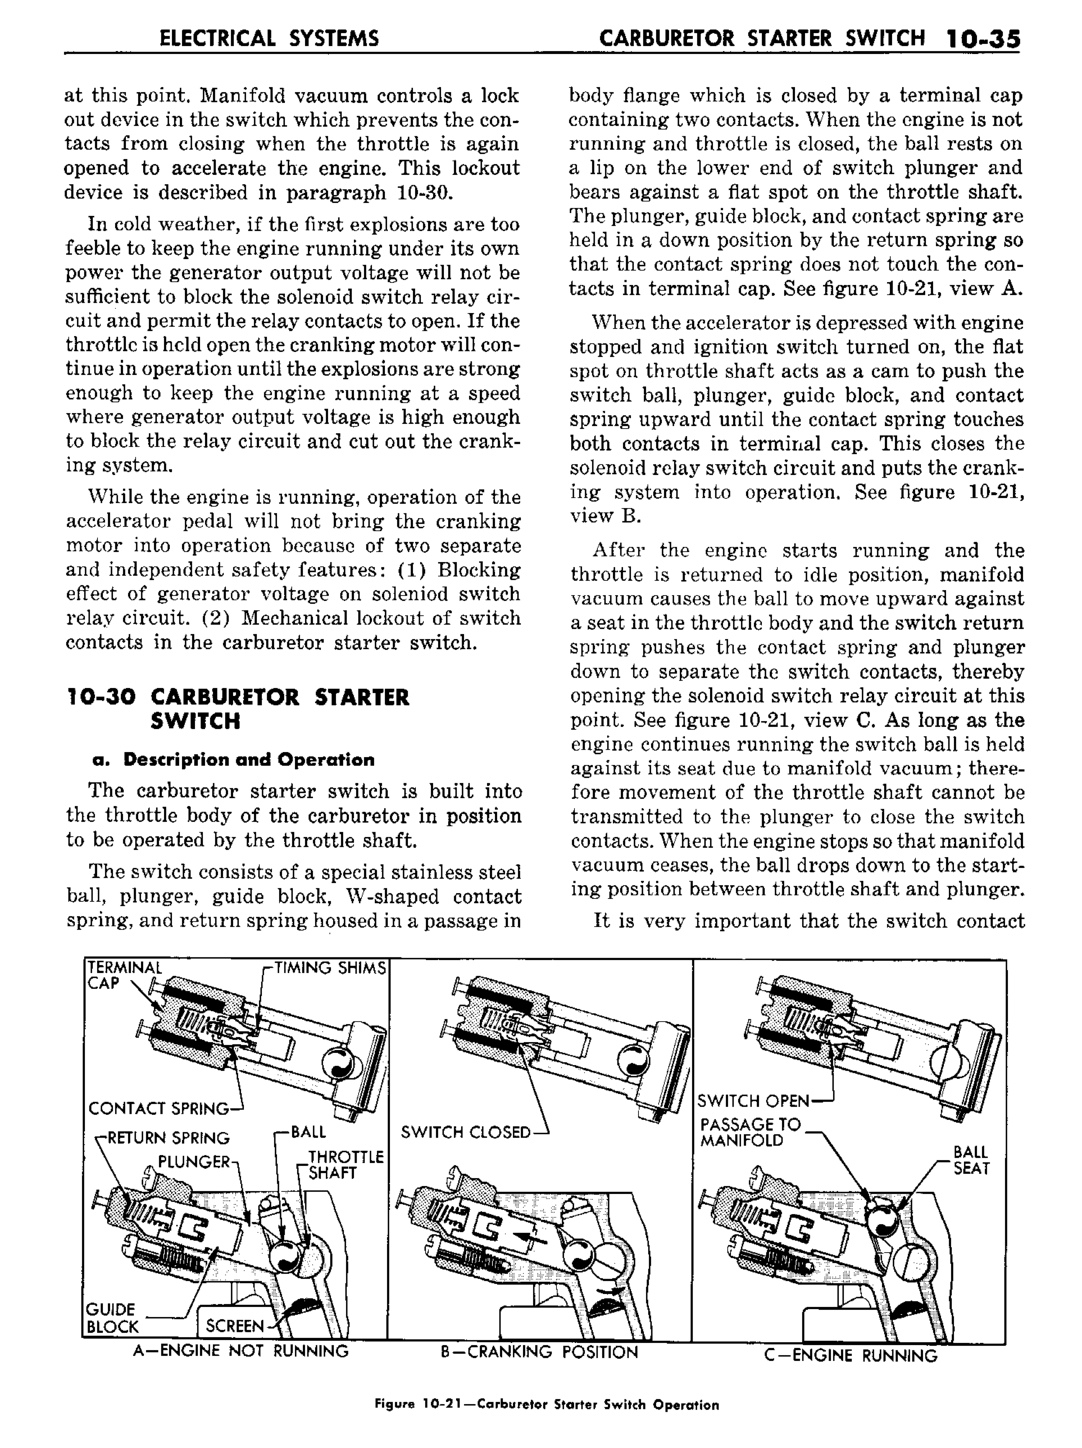 n_11 1960 Buick Shop Manual - Electrical Systems-035-035.jpg